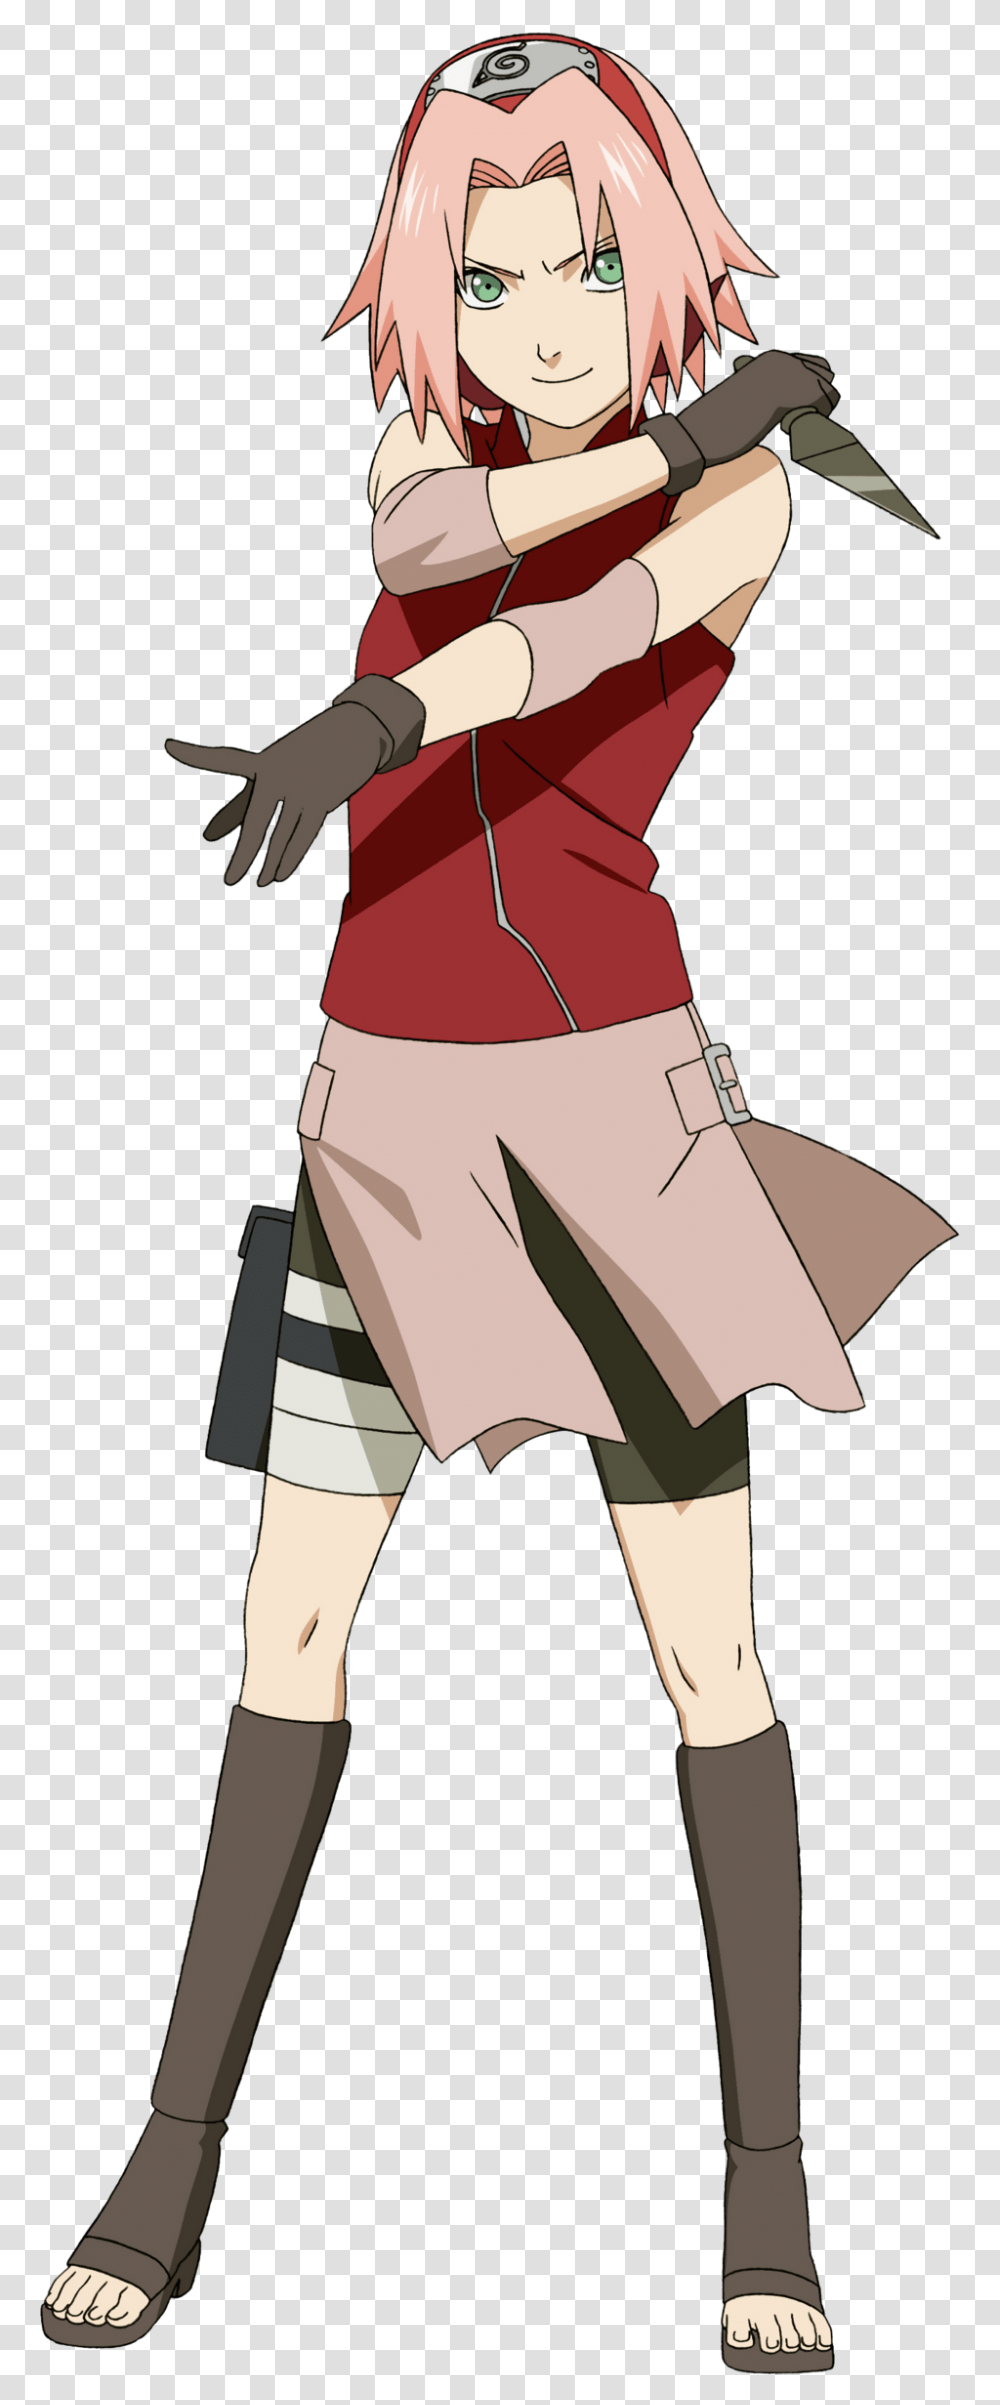 Download Naruto Shippuden Background For, Apparel, Skirt, Person Transparent Png